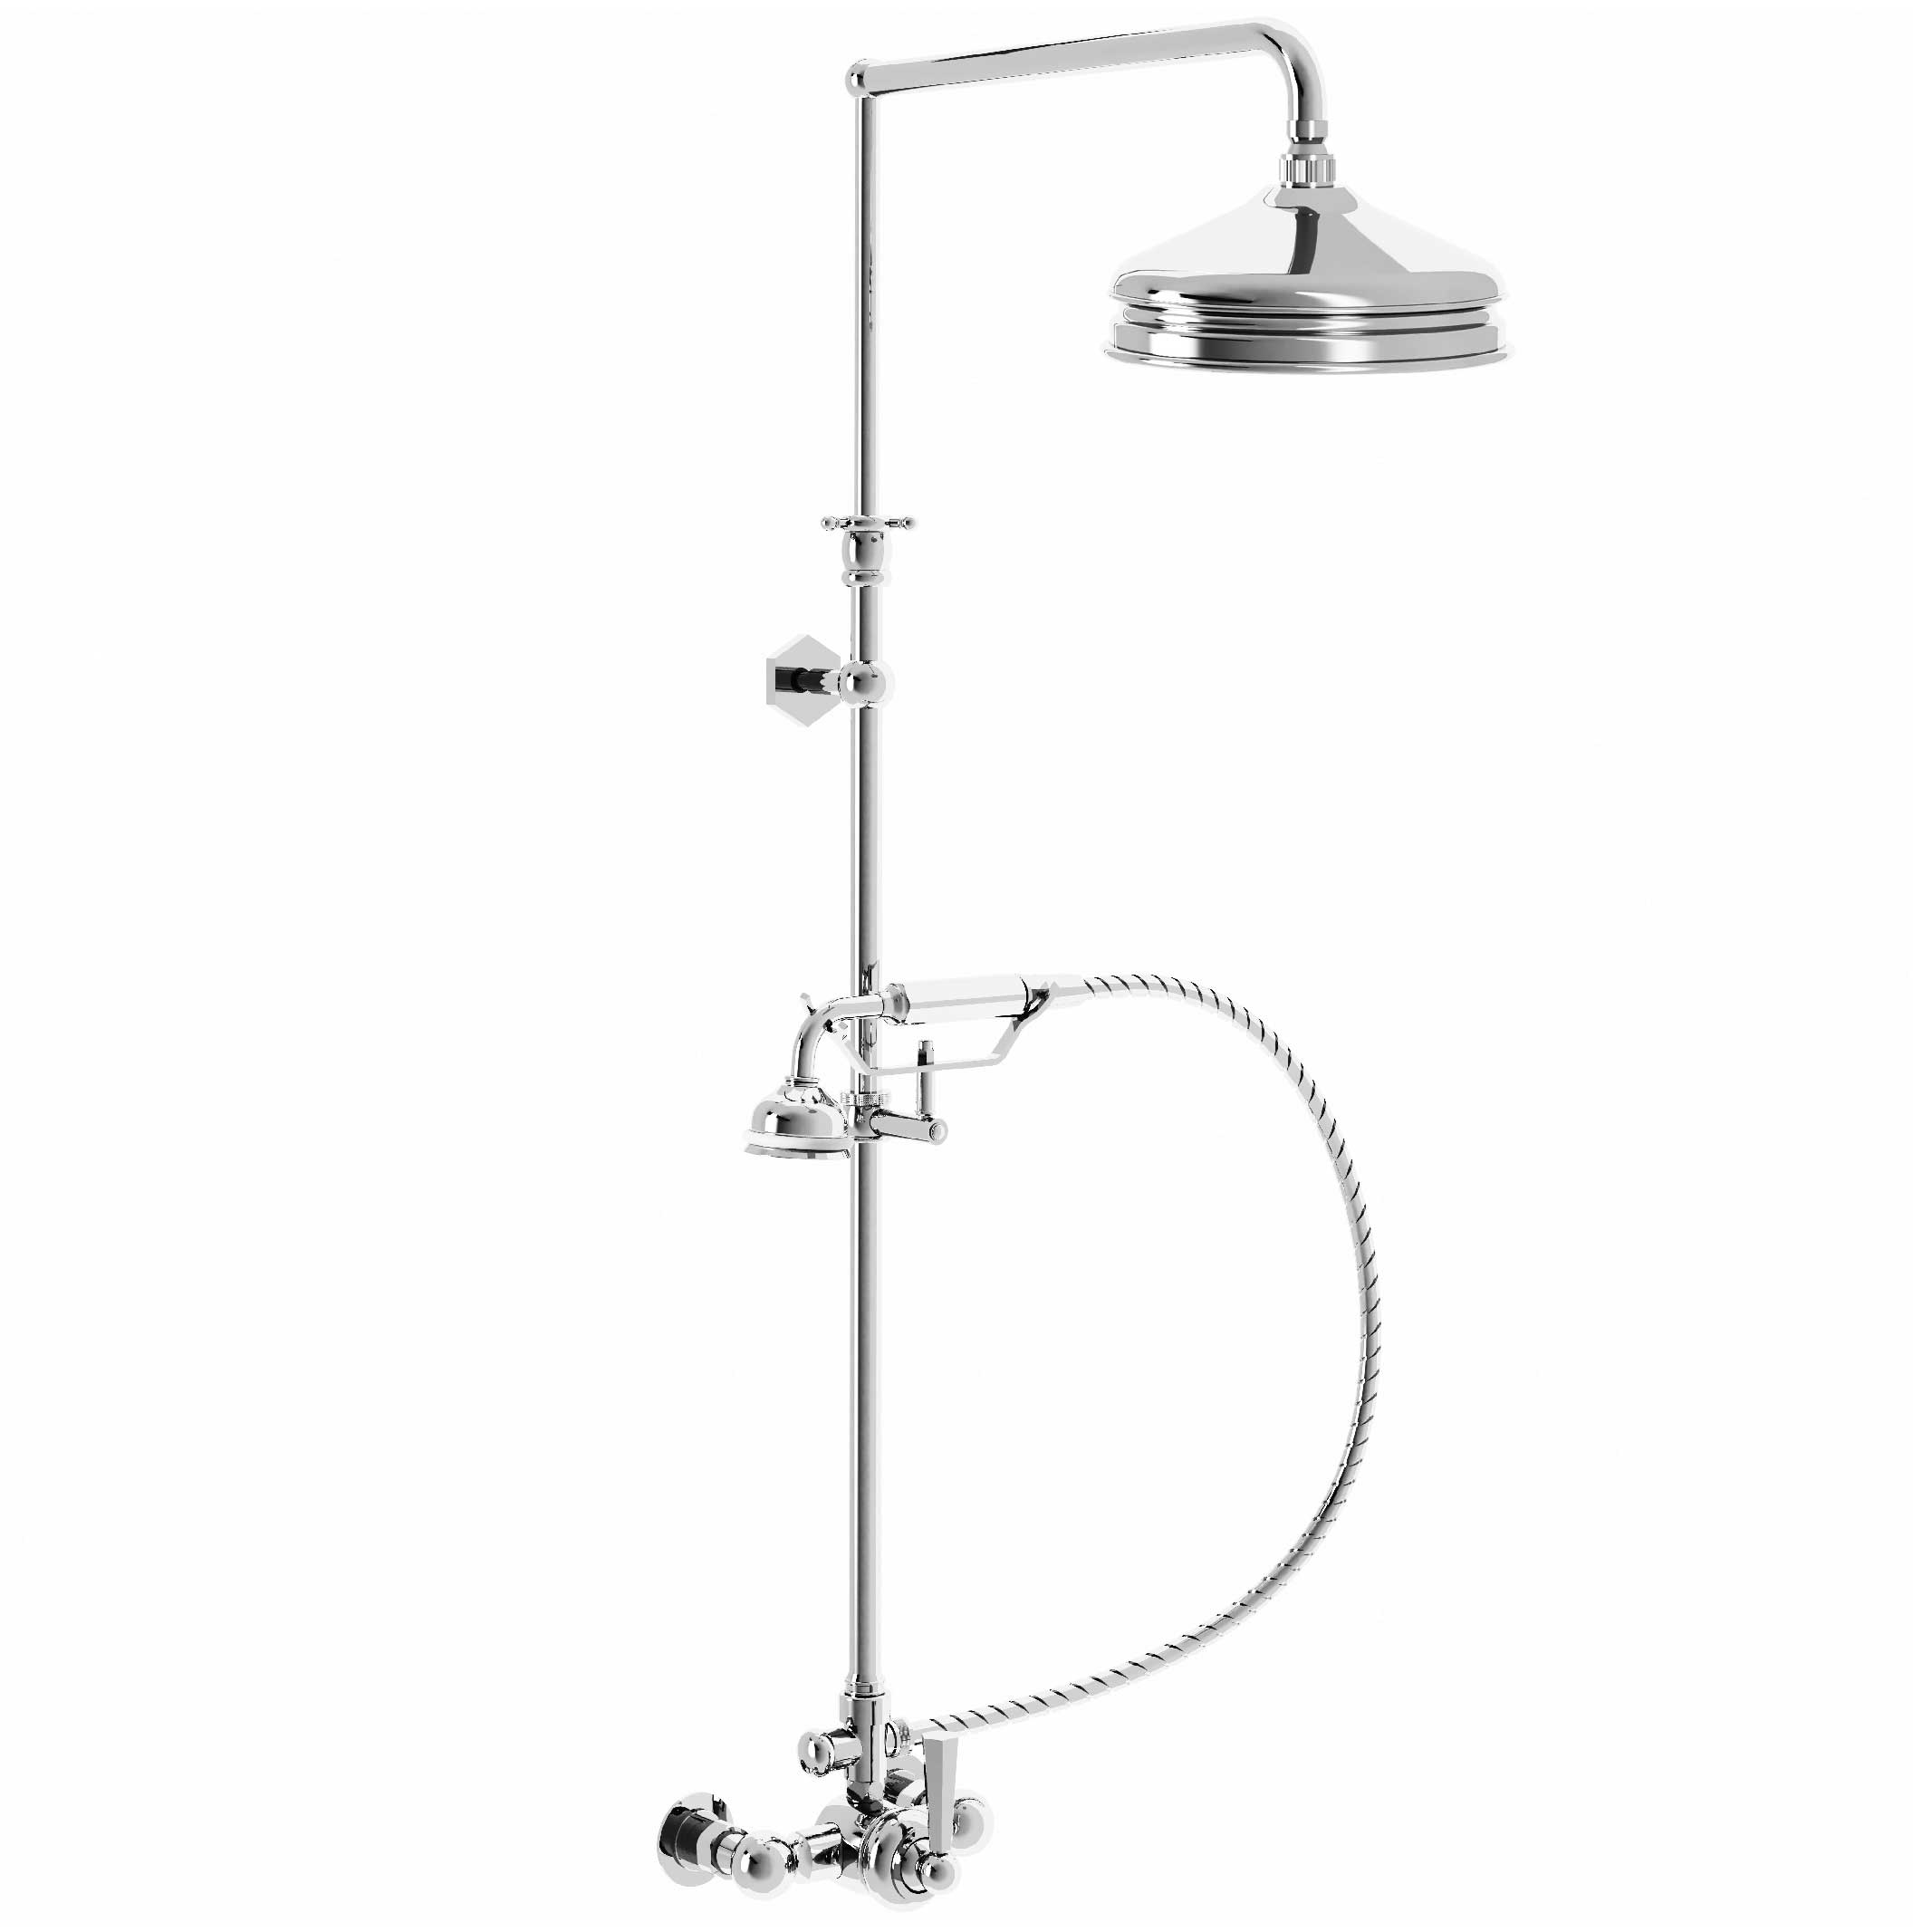 M13-2204M Single-lever shower mixer with column, anti-scaling